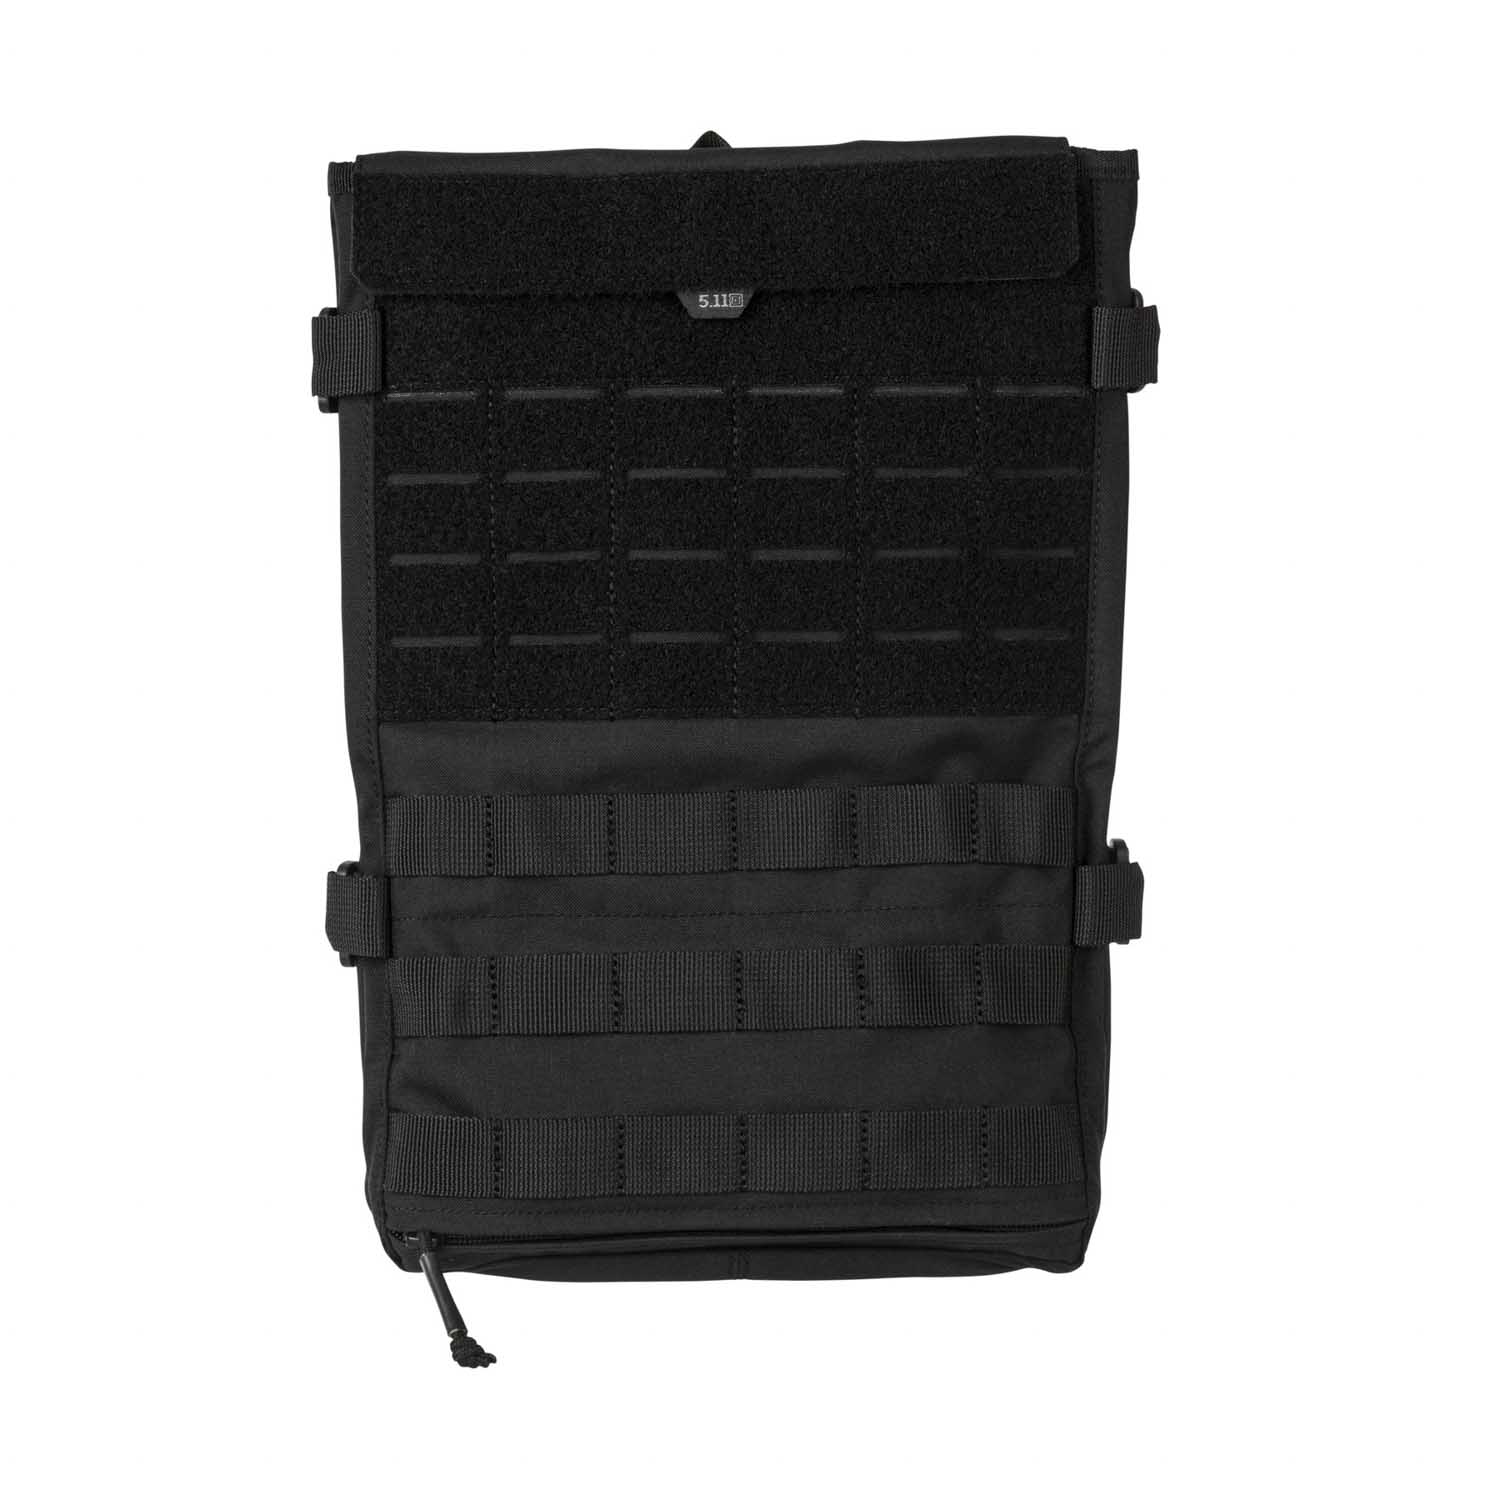 5.11 PC CONVERTIBLE HYDRATION CARRIER